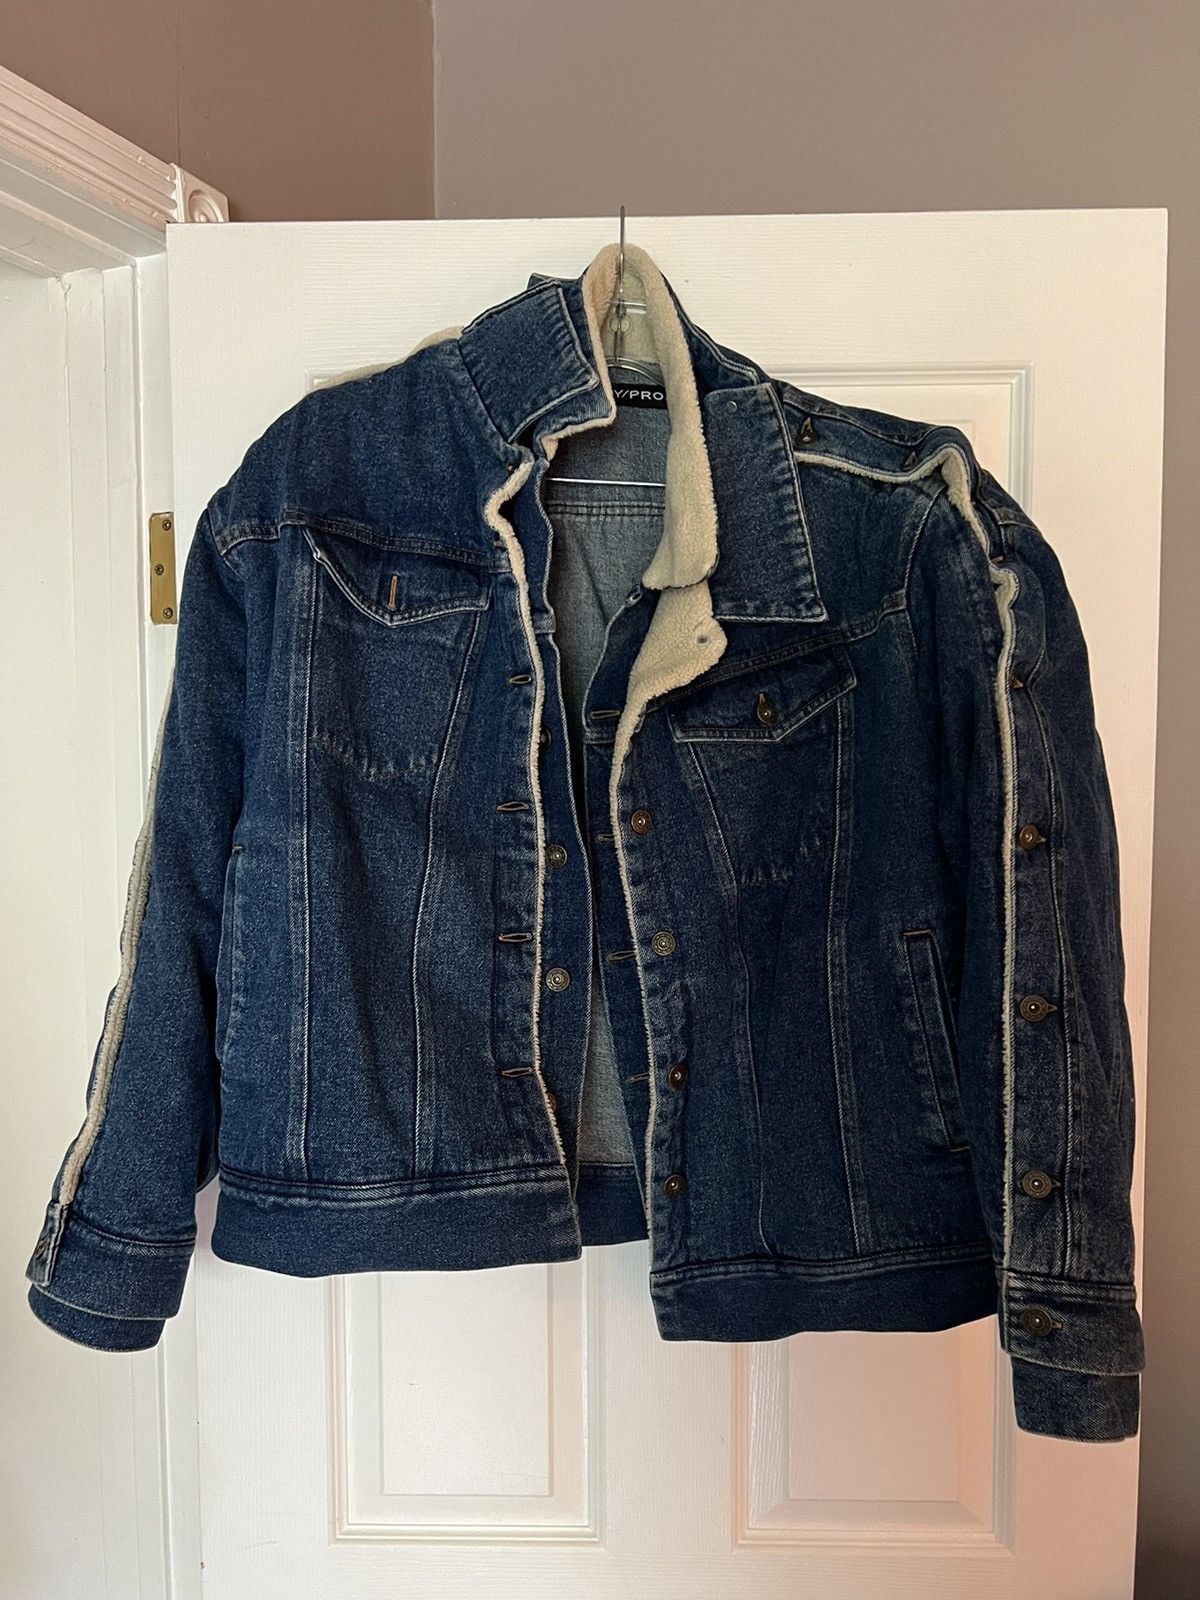 Y/Project Denim Jacket with sherpa lining | Grailed